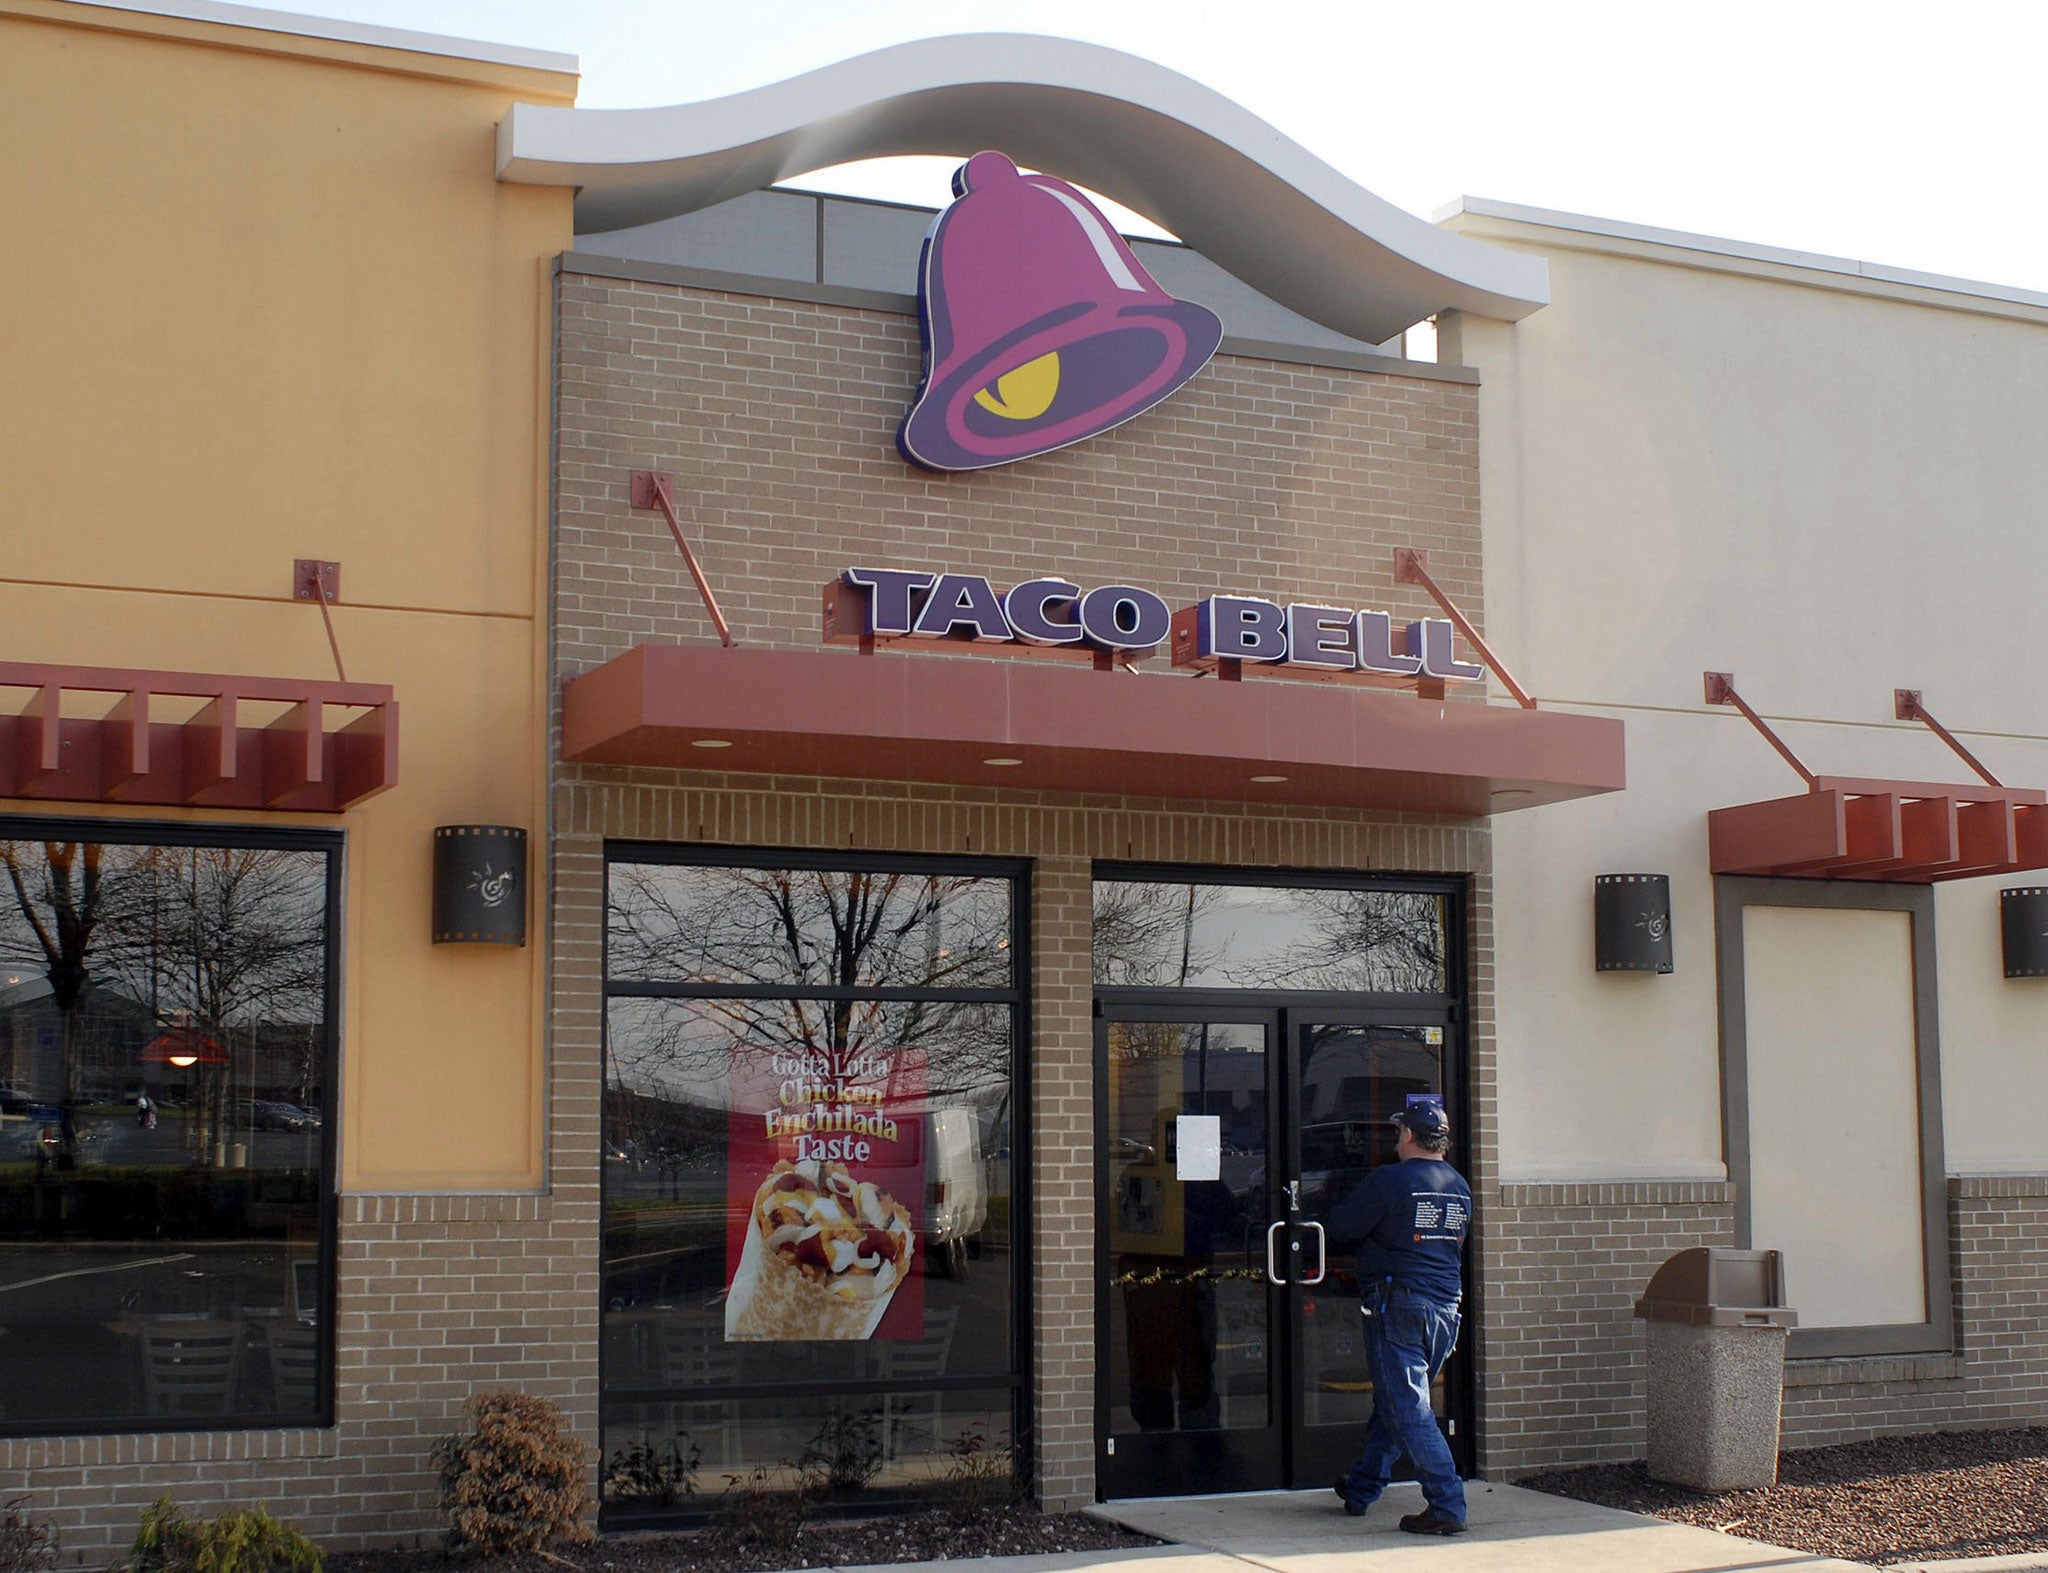 Taco Bell is to swap "meat" for "protein" in its menu descriptions